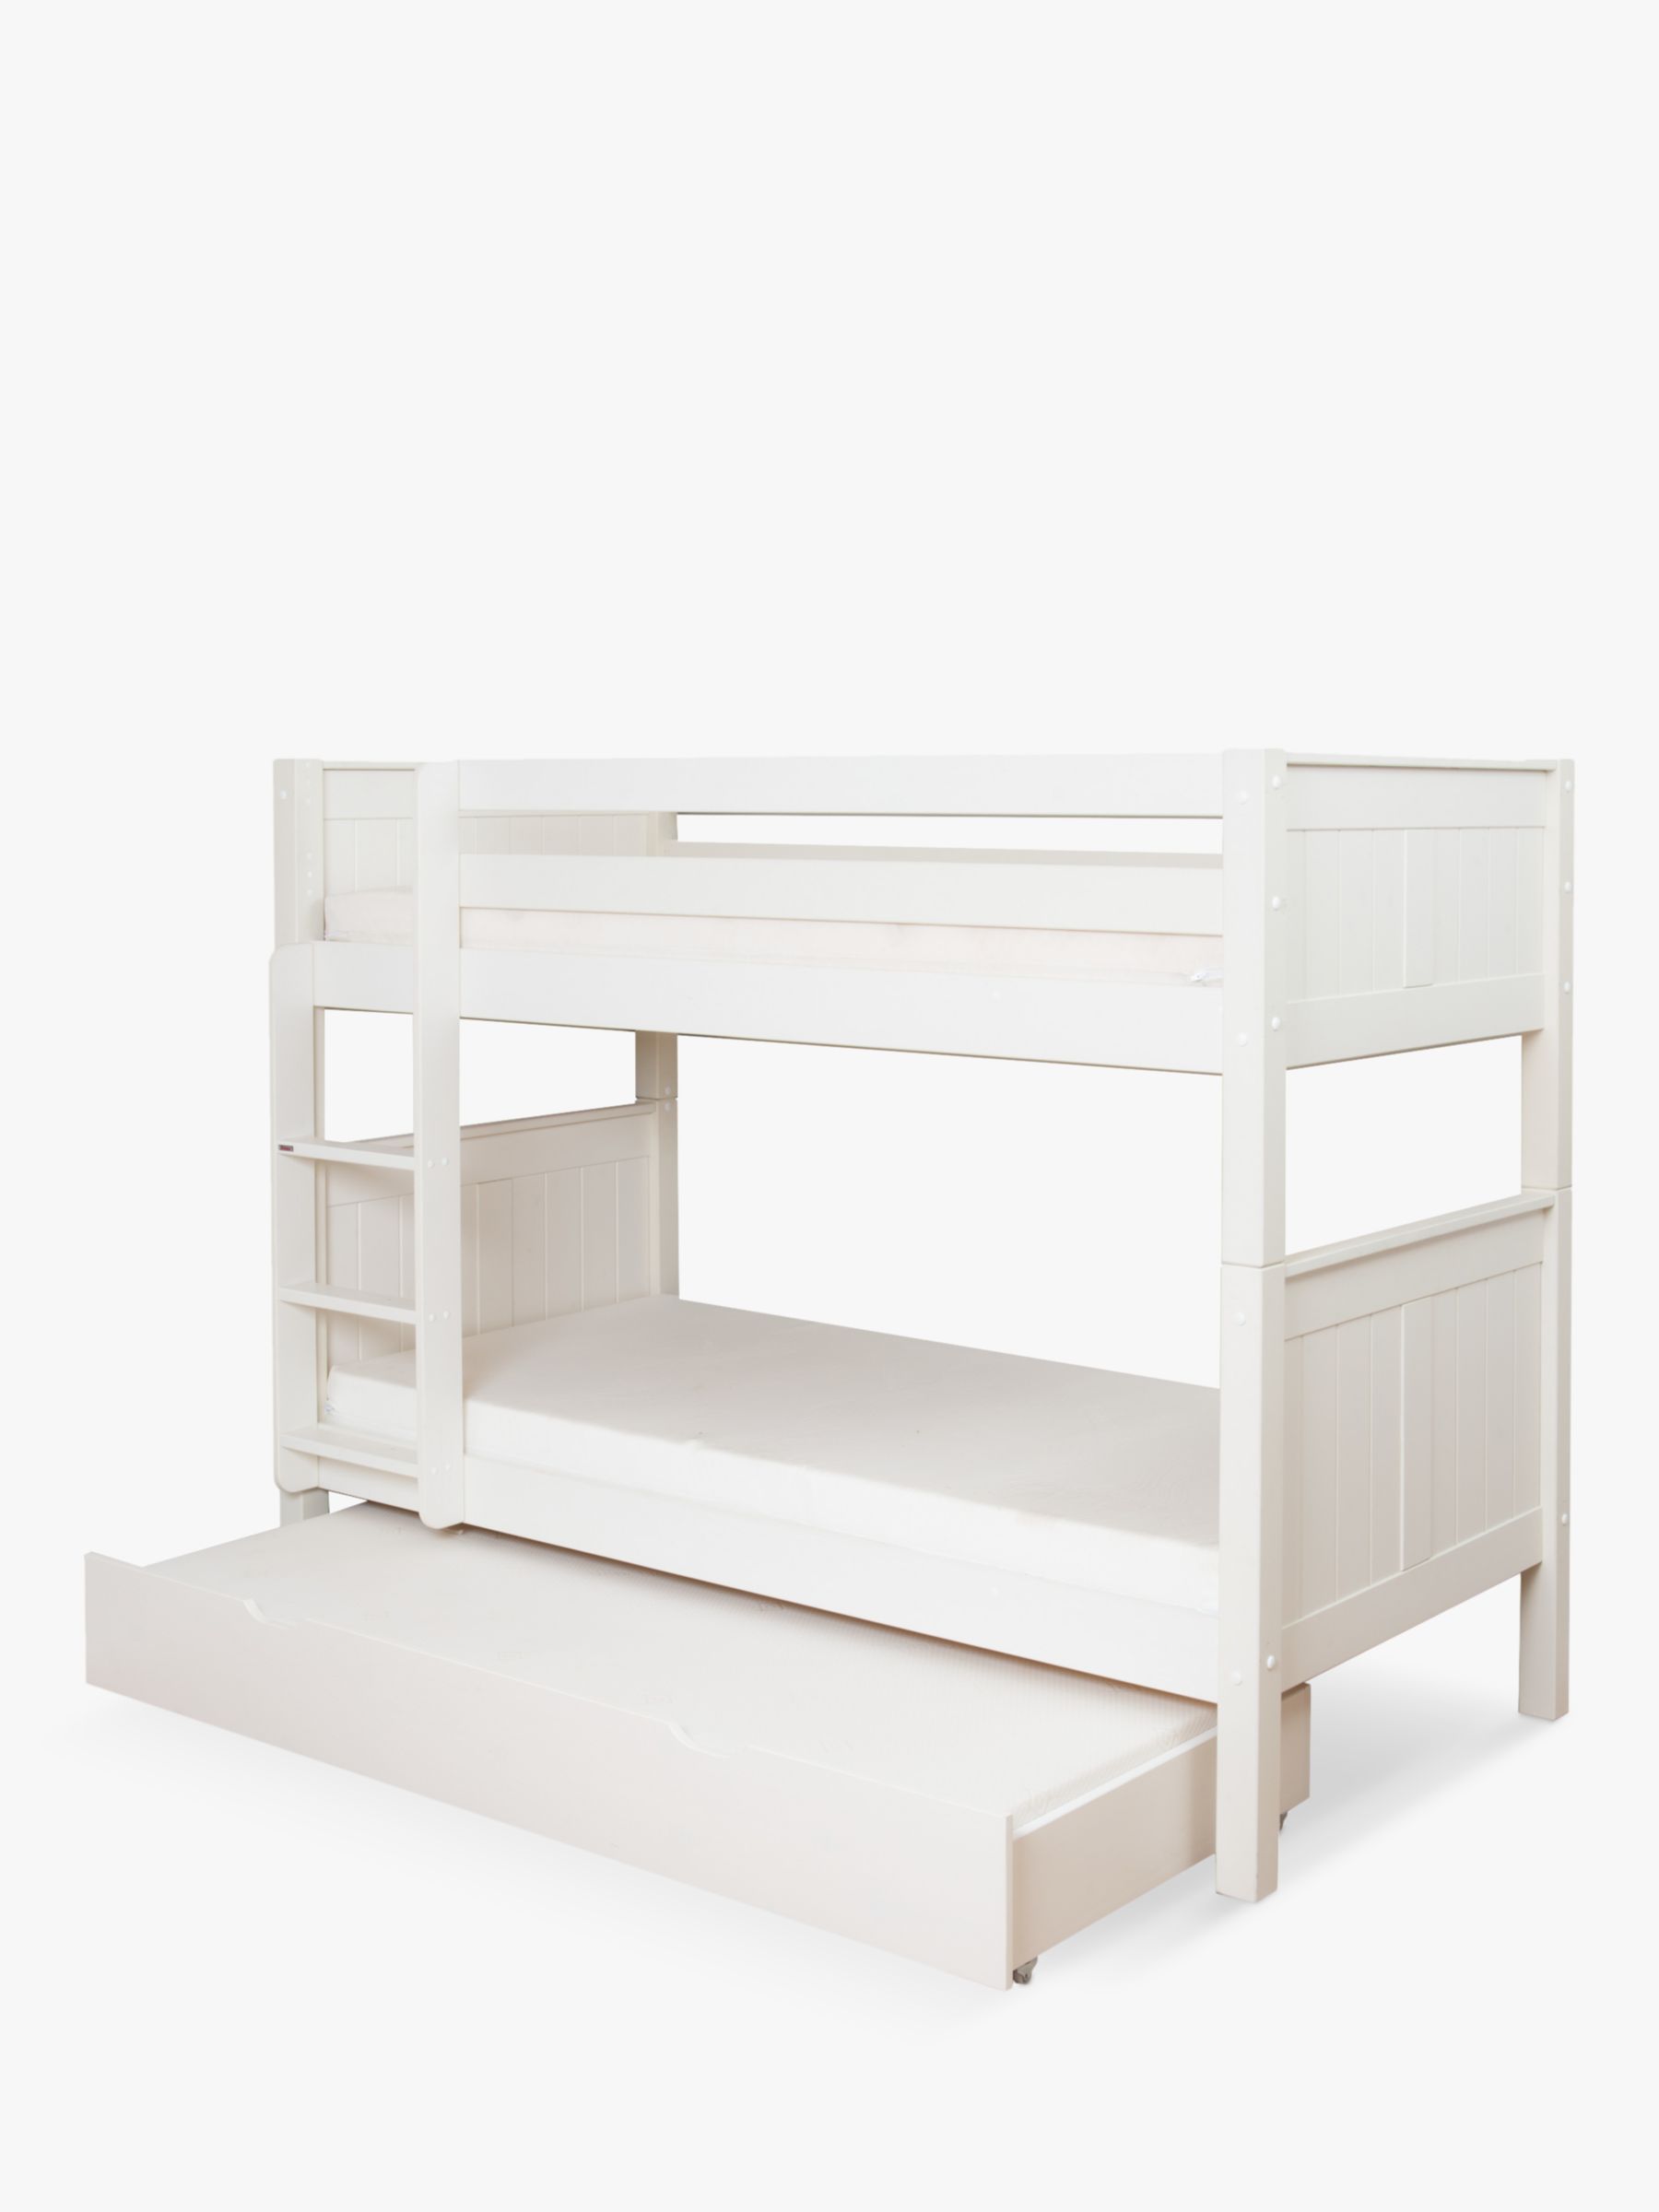 Bunk Beds John Lewis Partners, 4 Bunk Beds In One